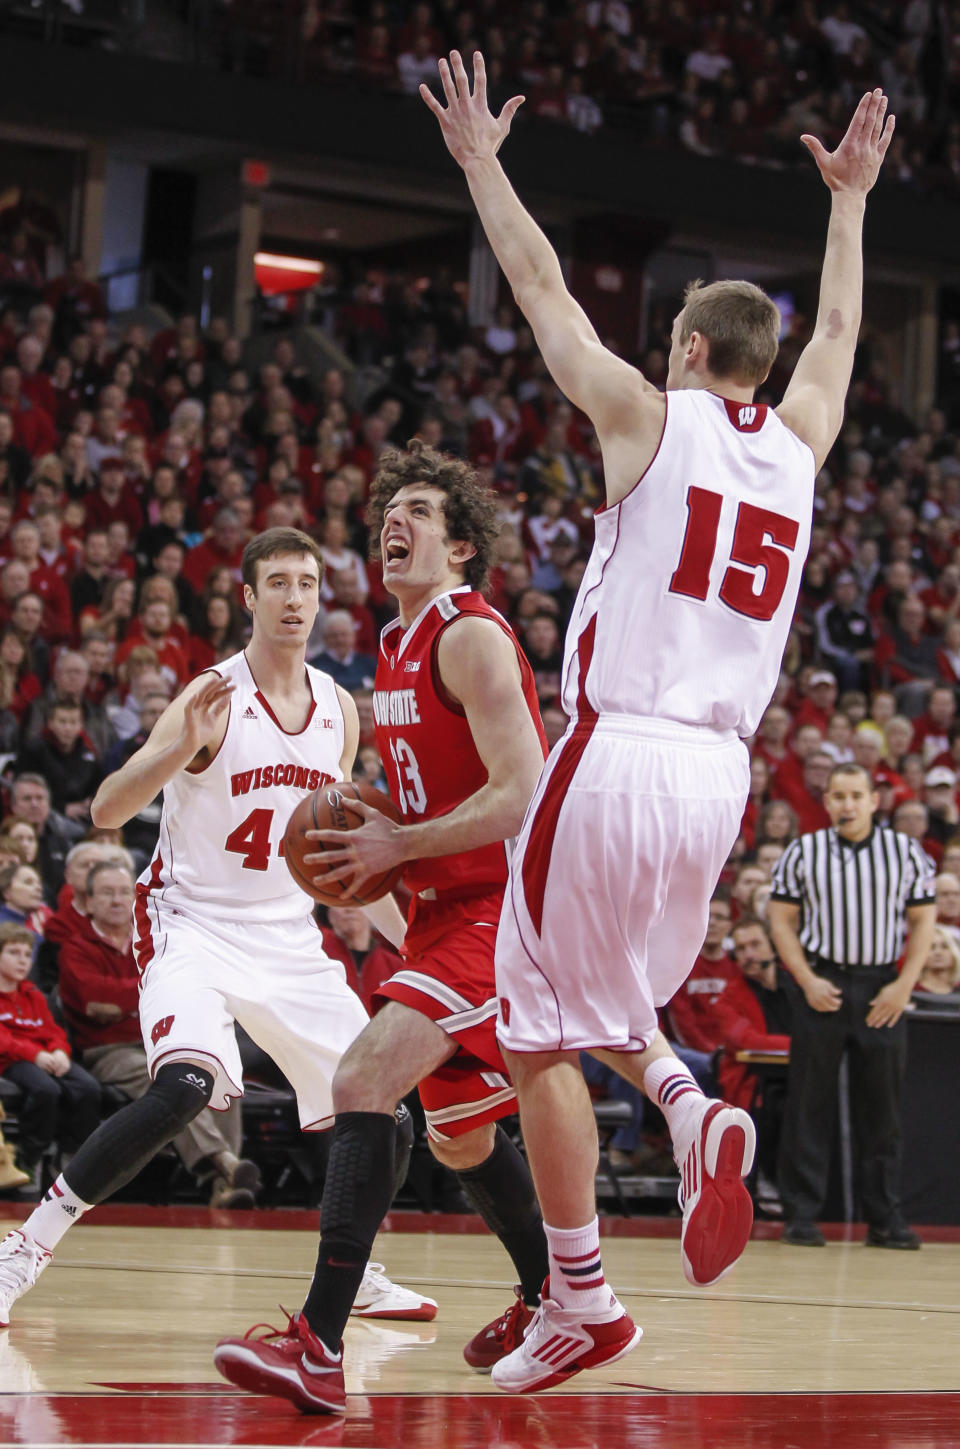 Ohio State's Amedeo Della Valle, center, shoots between Wisconsin's Frank Kaminsky, left, and Sam Dekker (15) during the first half of an NCAA college basketball game Saturday, Feb. 1, 2014, in Madison, Wis. (AP Photo/Andy Manis)